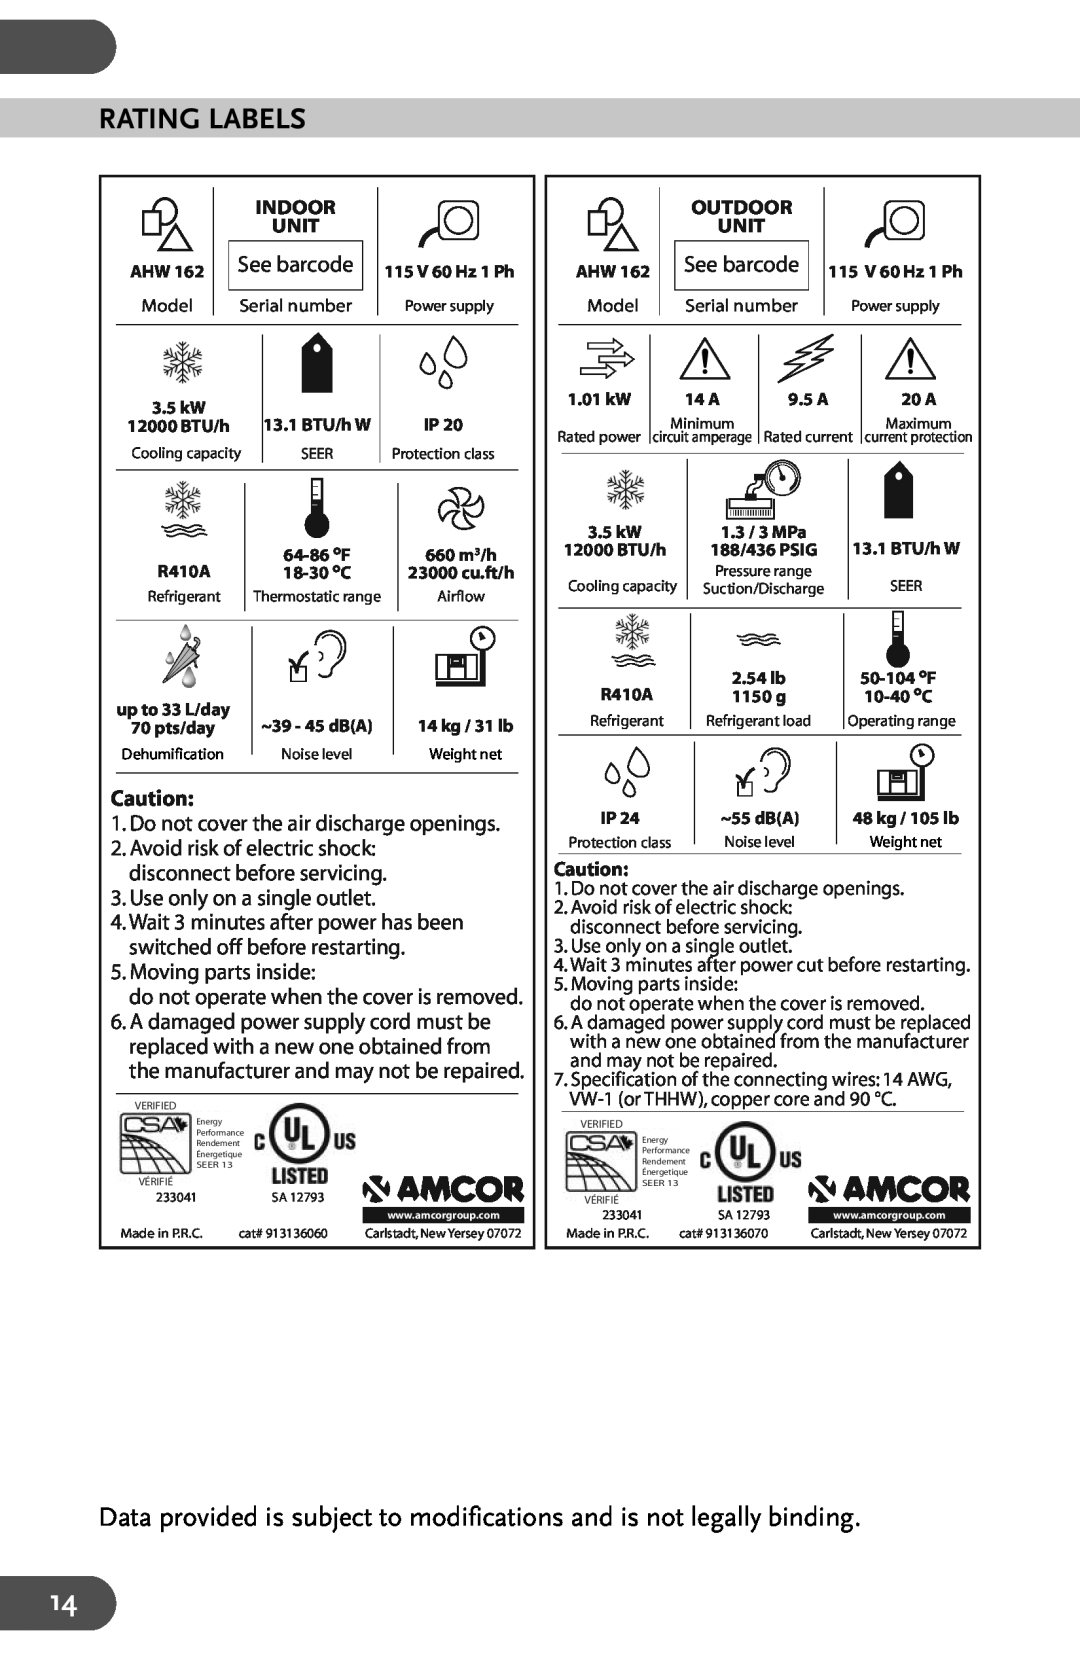 Amcor AHW 162 Rating Labels, Do not cover the air discharge openings, Use only on a single outlet, Moving parts inside 